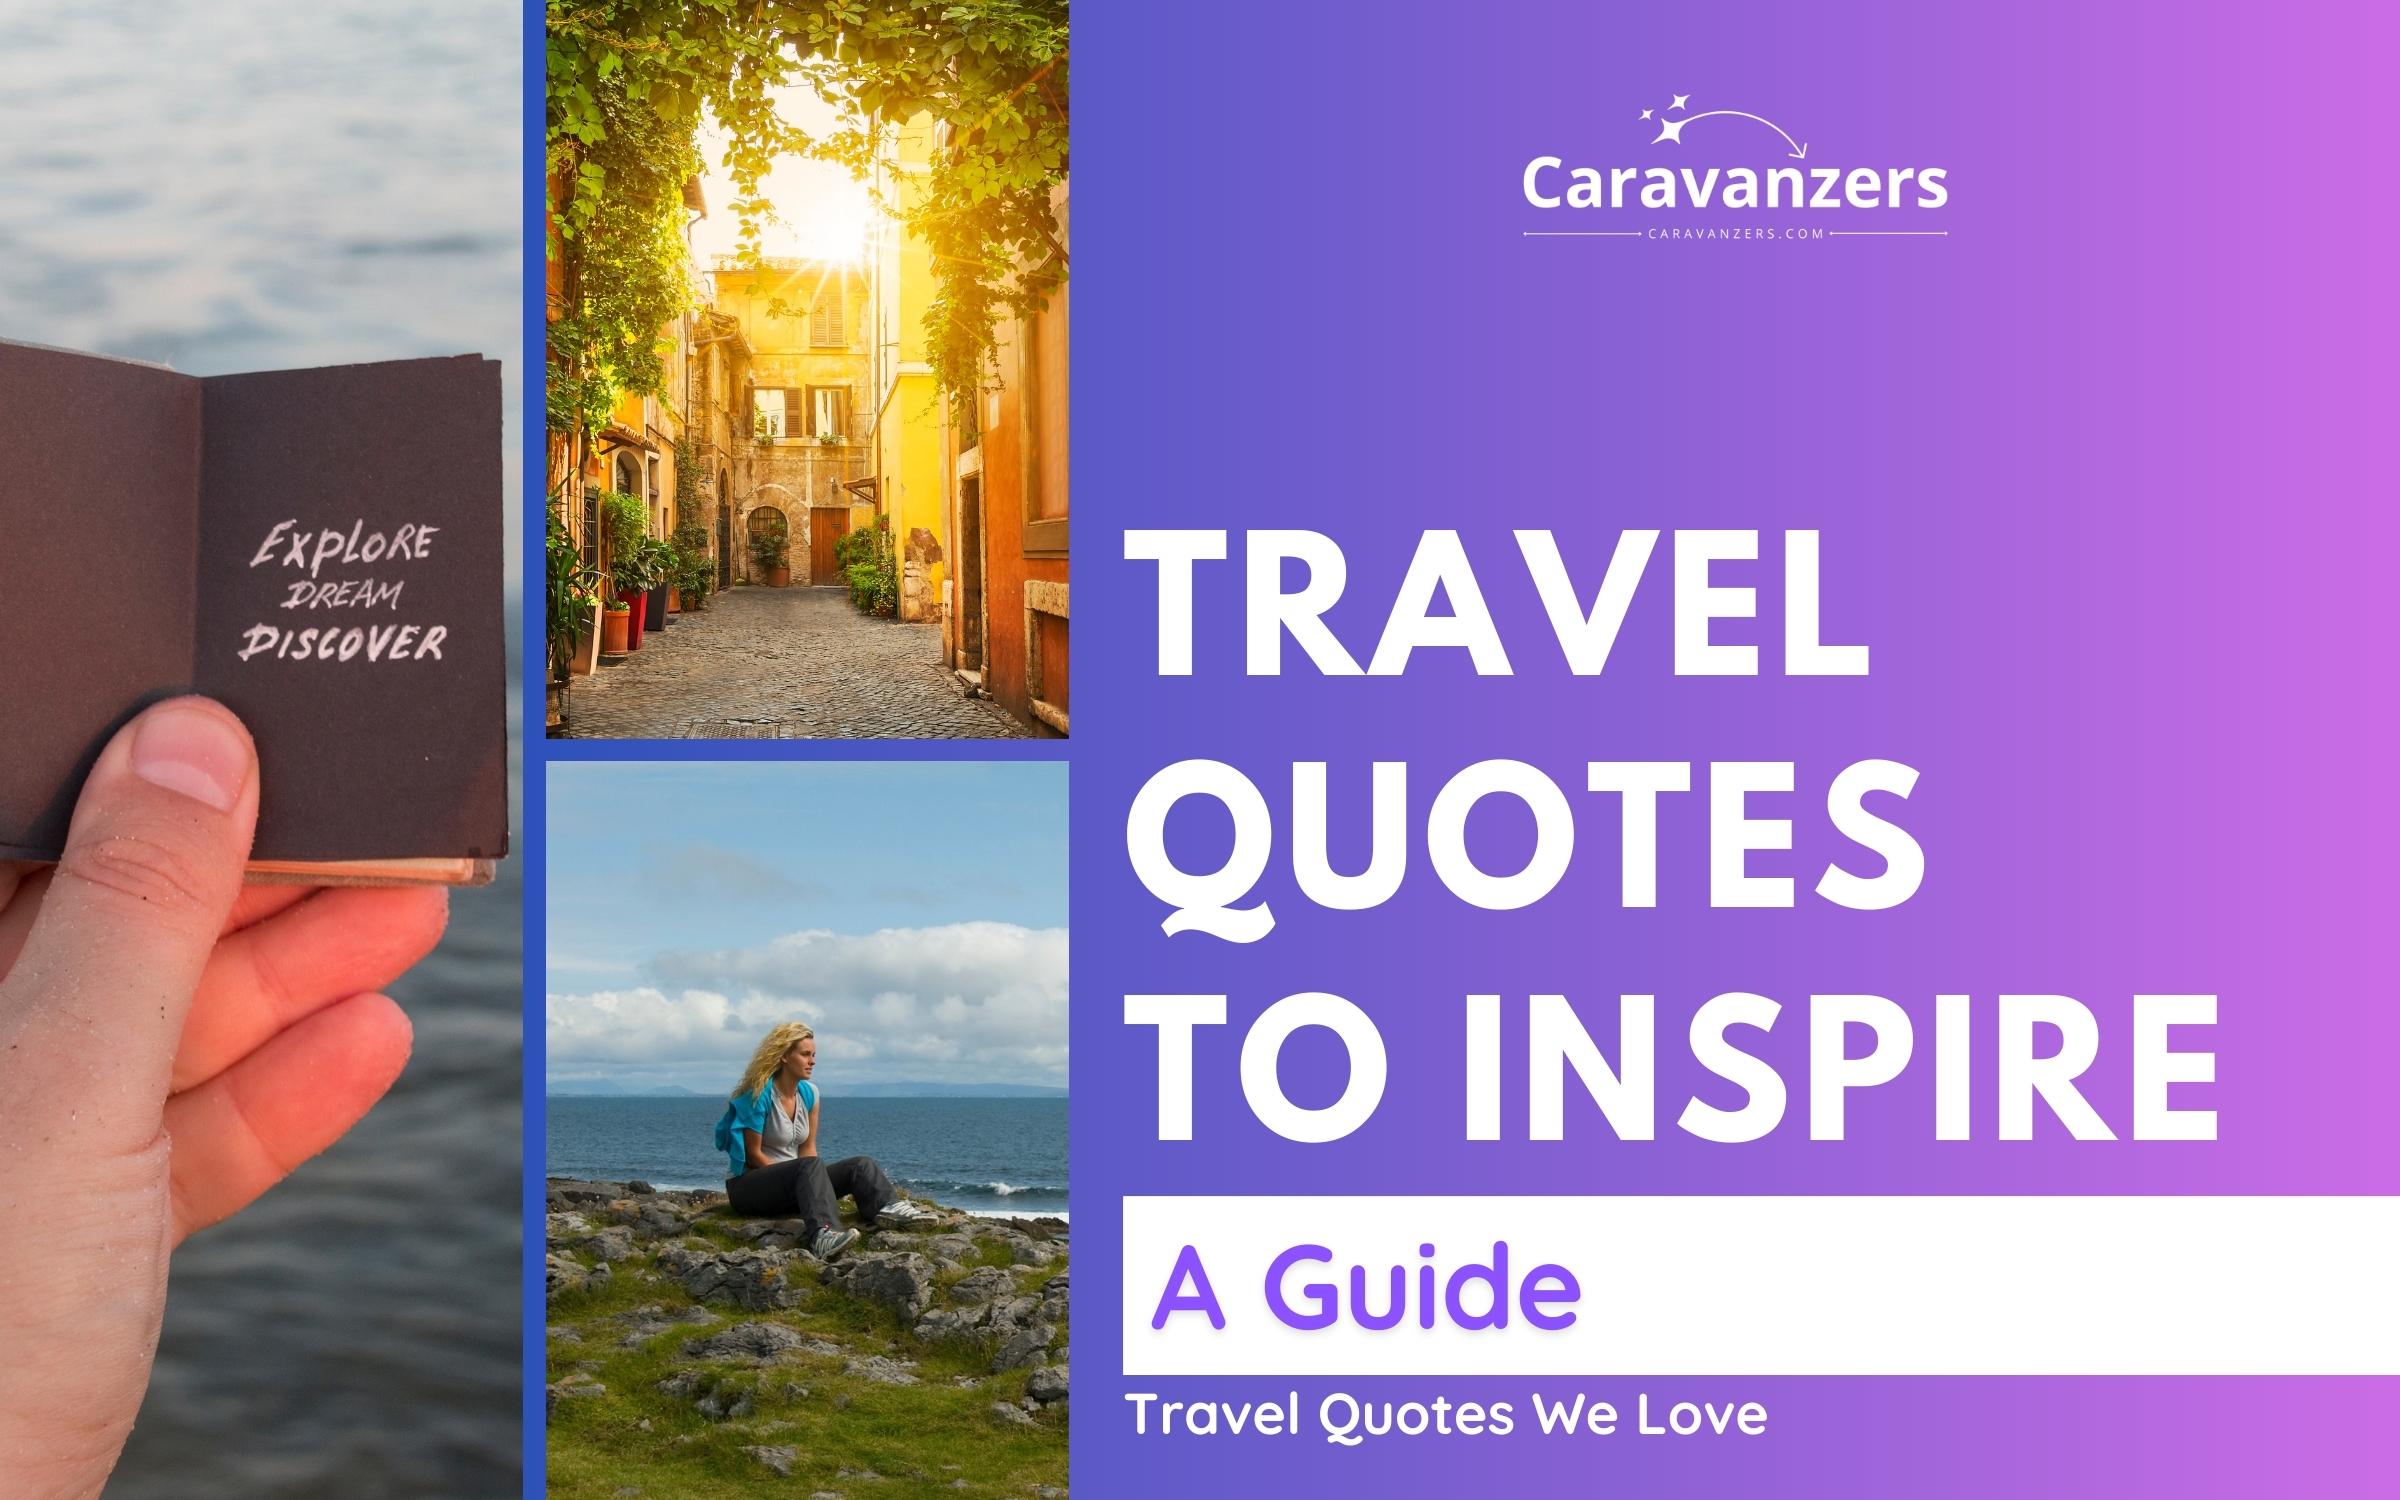 Inspirational Travel Quotes for Adventure, Memories, and More